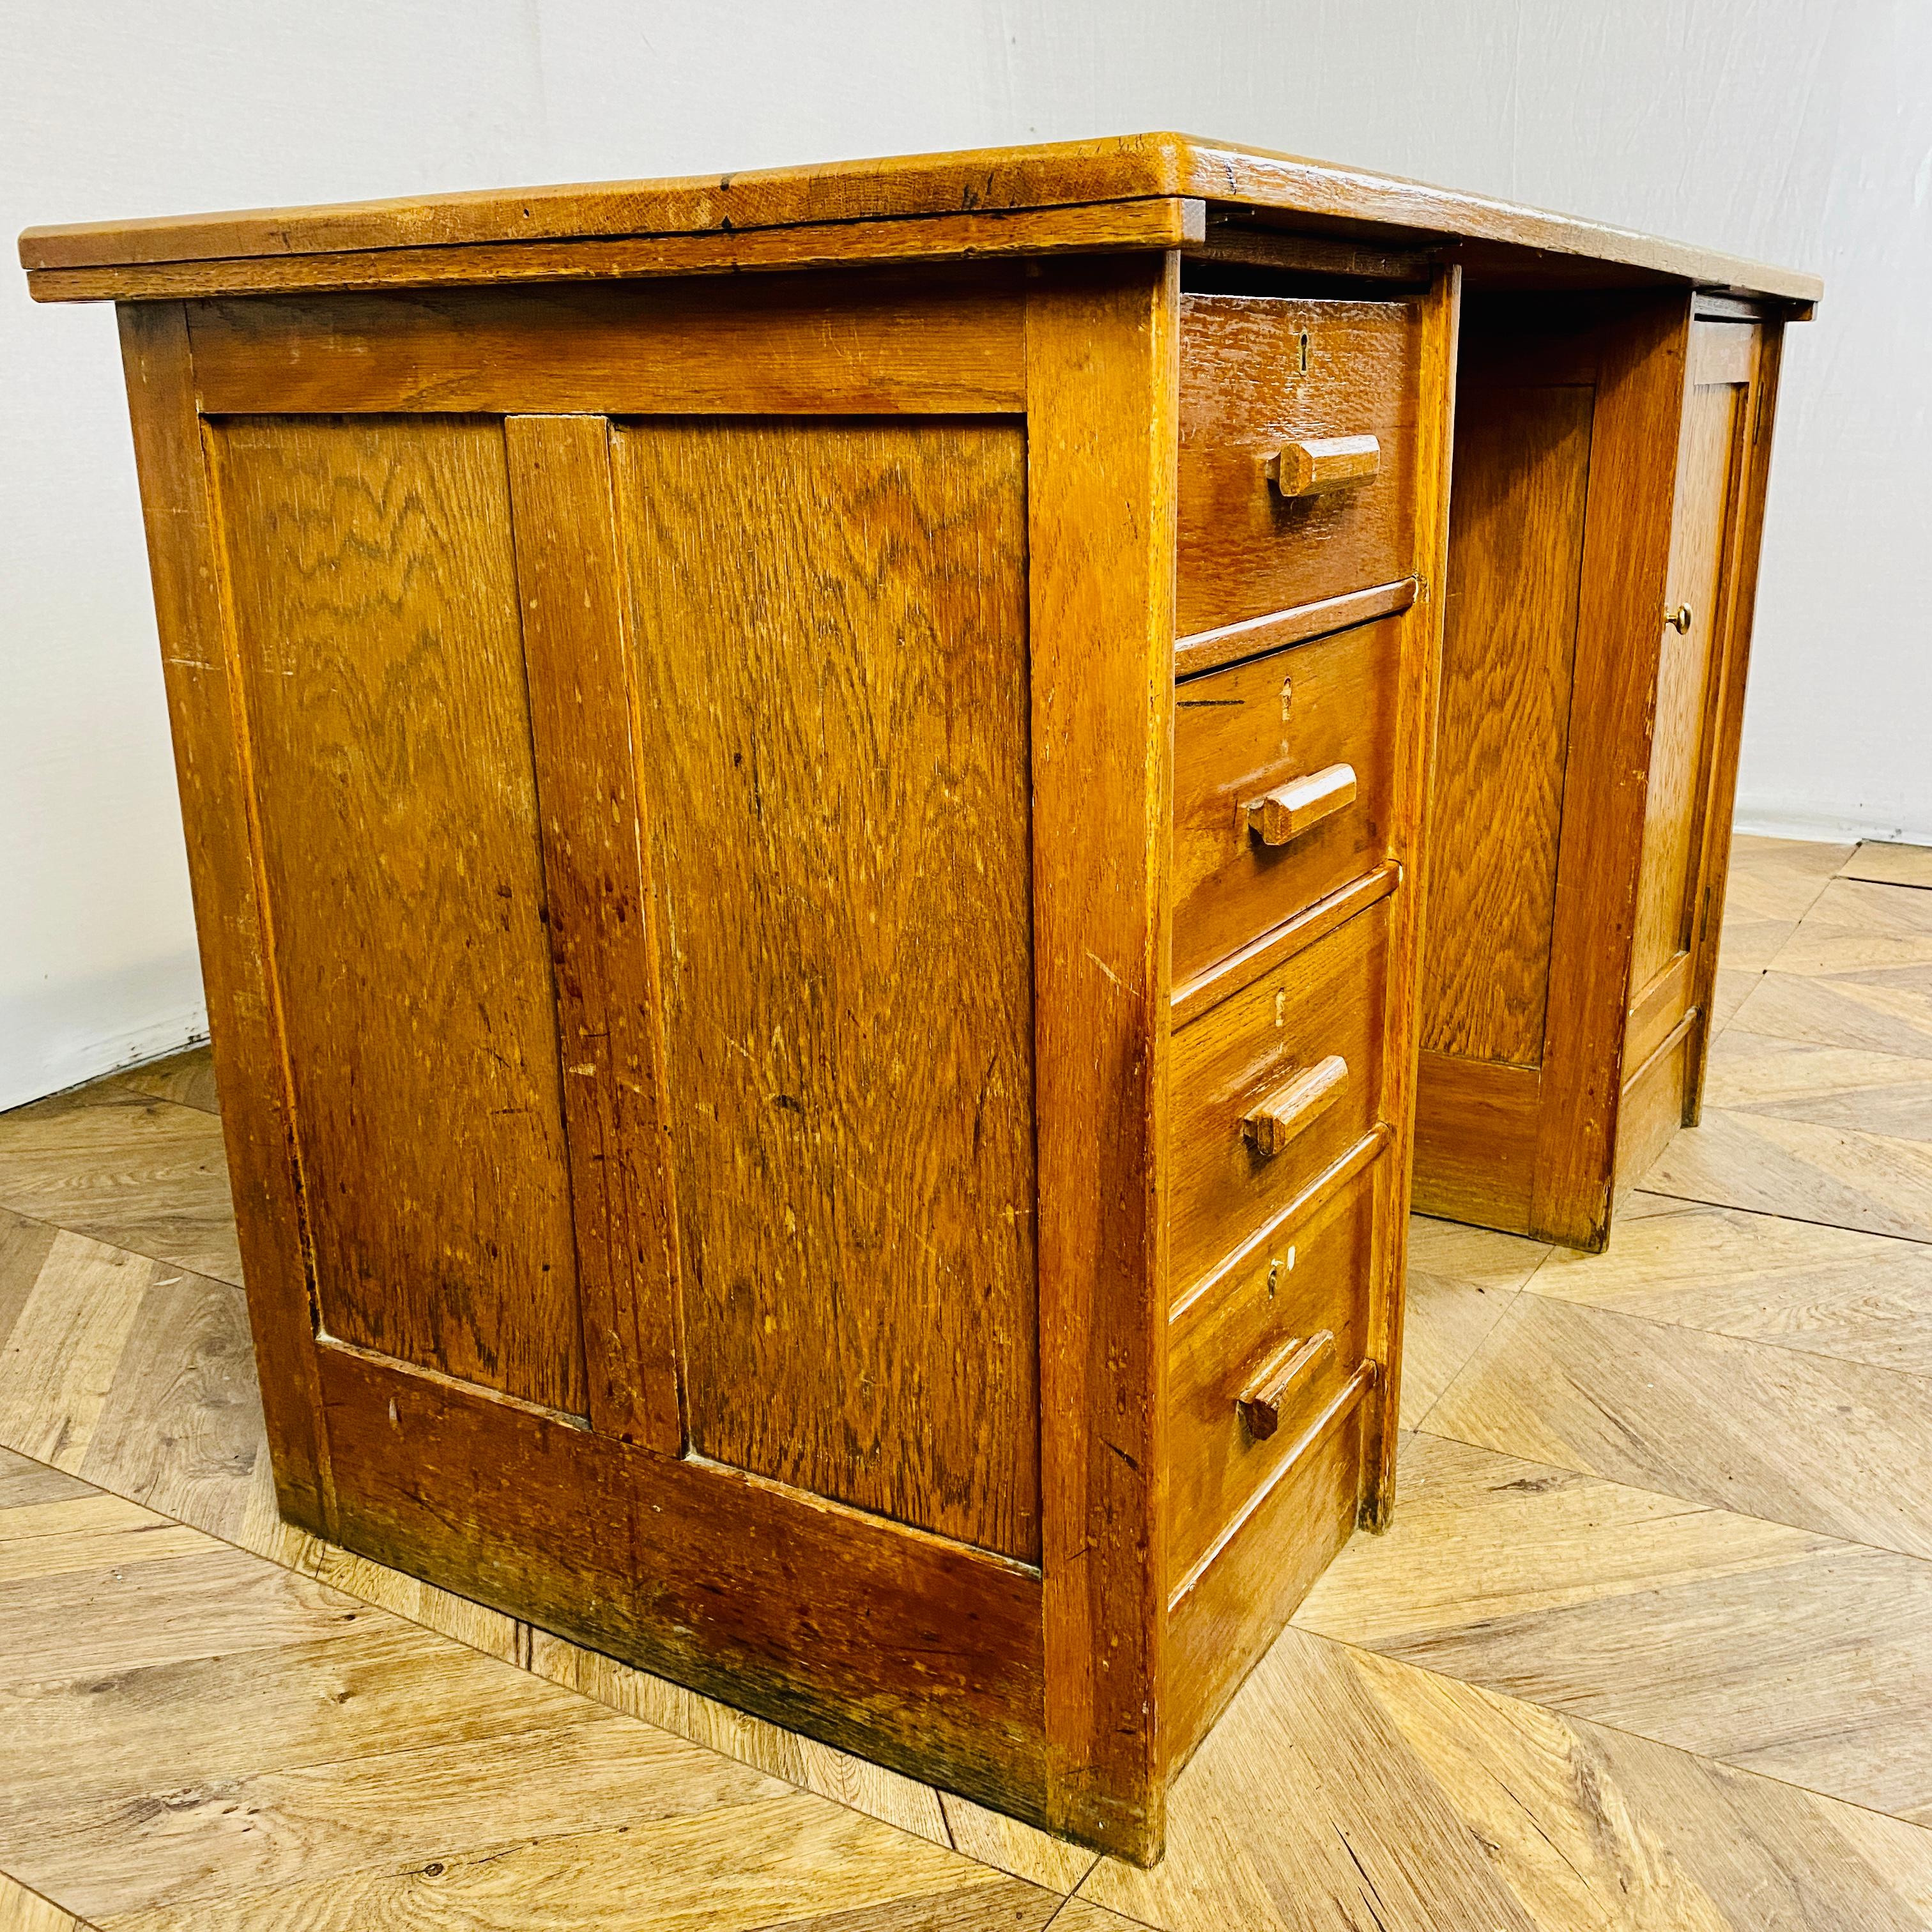 A beautifully large vintage, mid century oak pedestal desk, circa 1940s.

The desk, which came directly from the University of Cambridge, is in good vintage condition with age related marks and scuffs, which really add to its patina and charm but